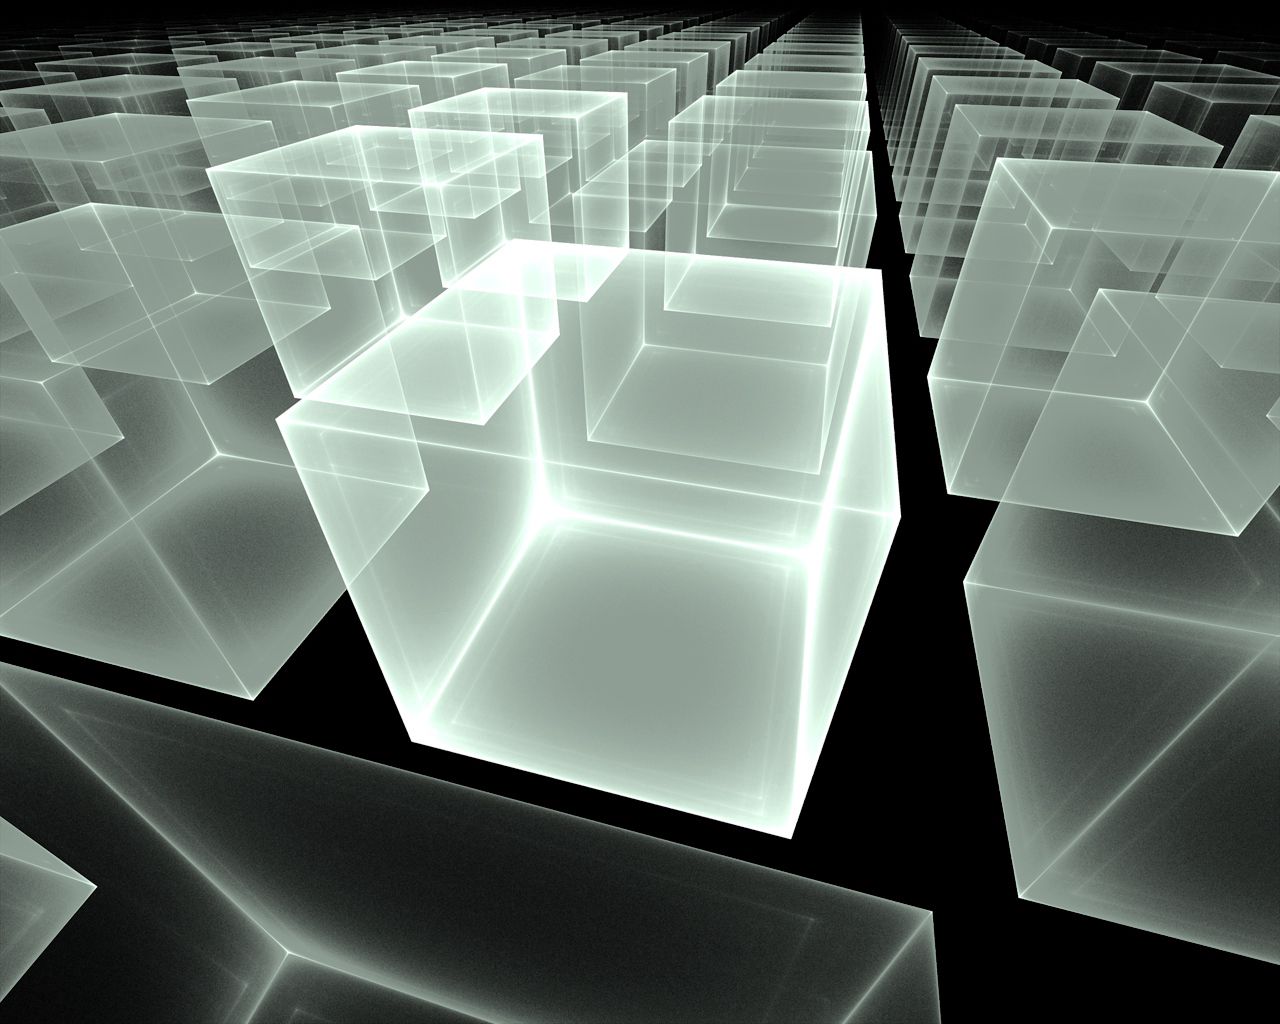 shadow of the cube, cube, cube shadow, abstract Lock Screen Images